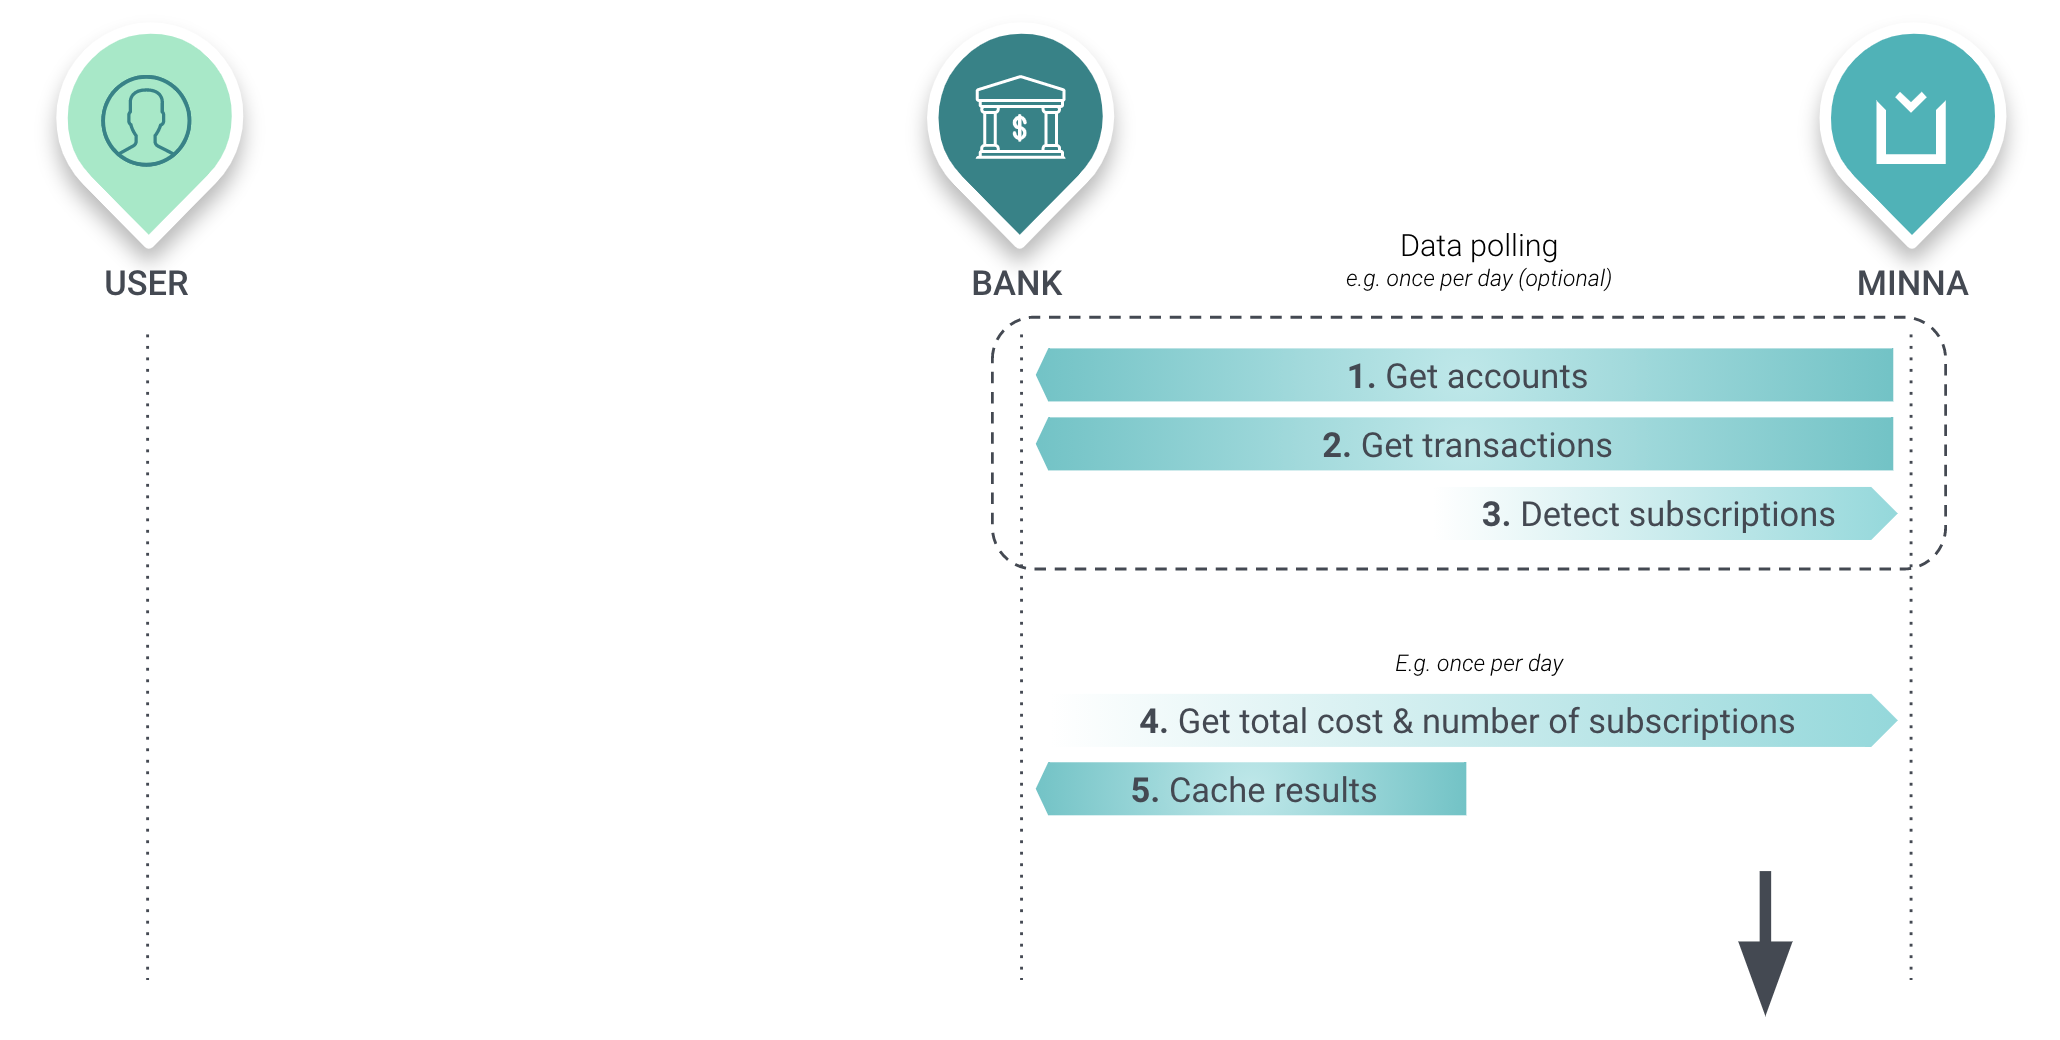 Overview of getting total cost and number of subscriptions using data pull